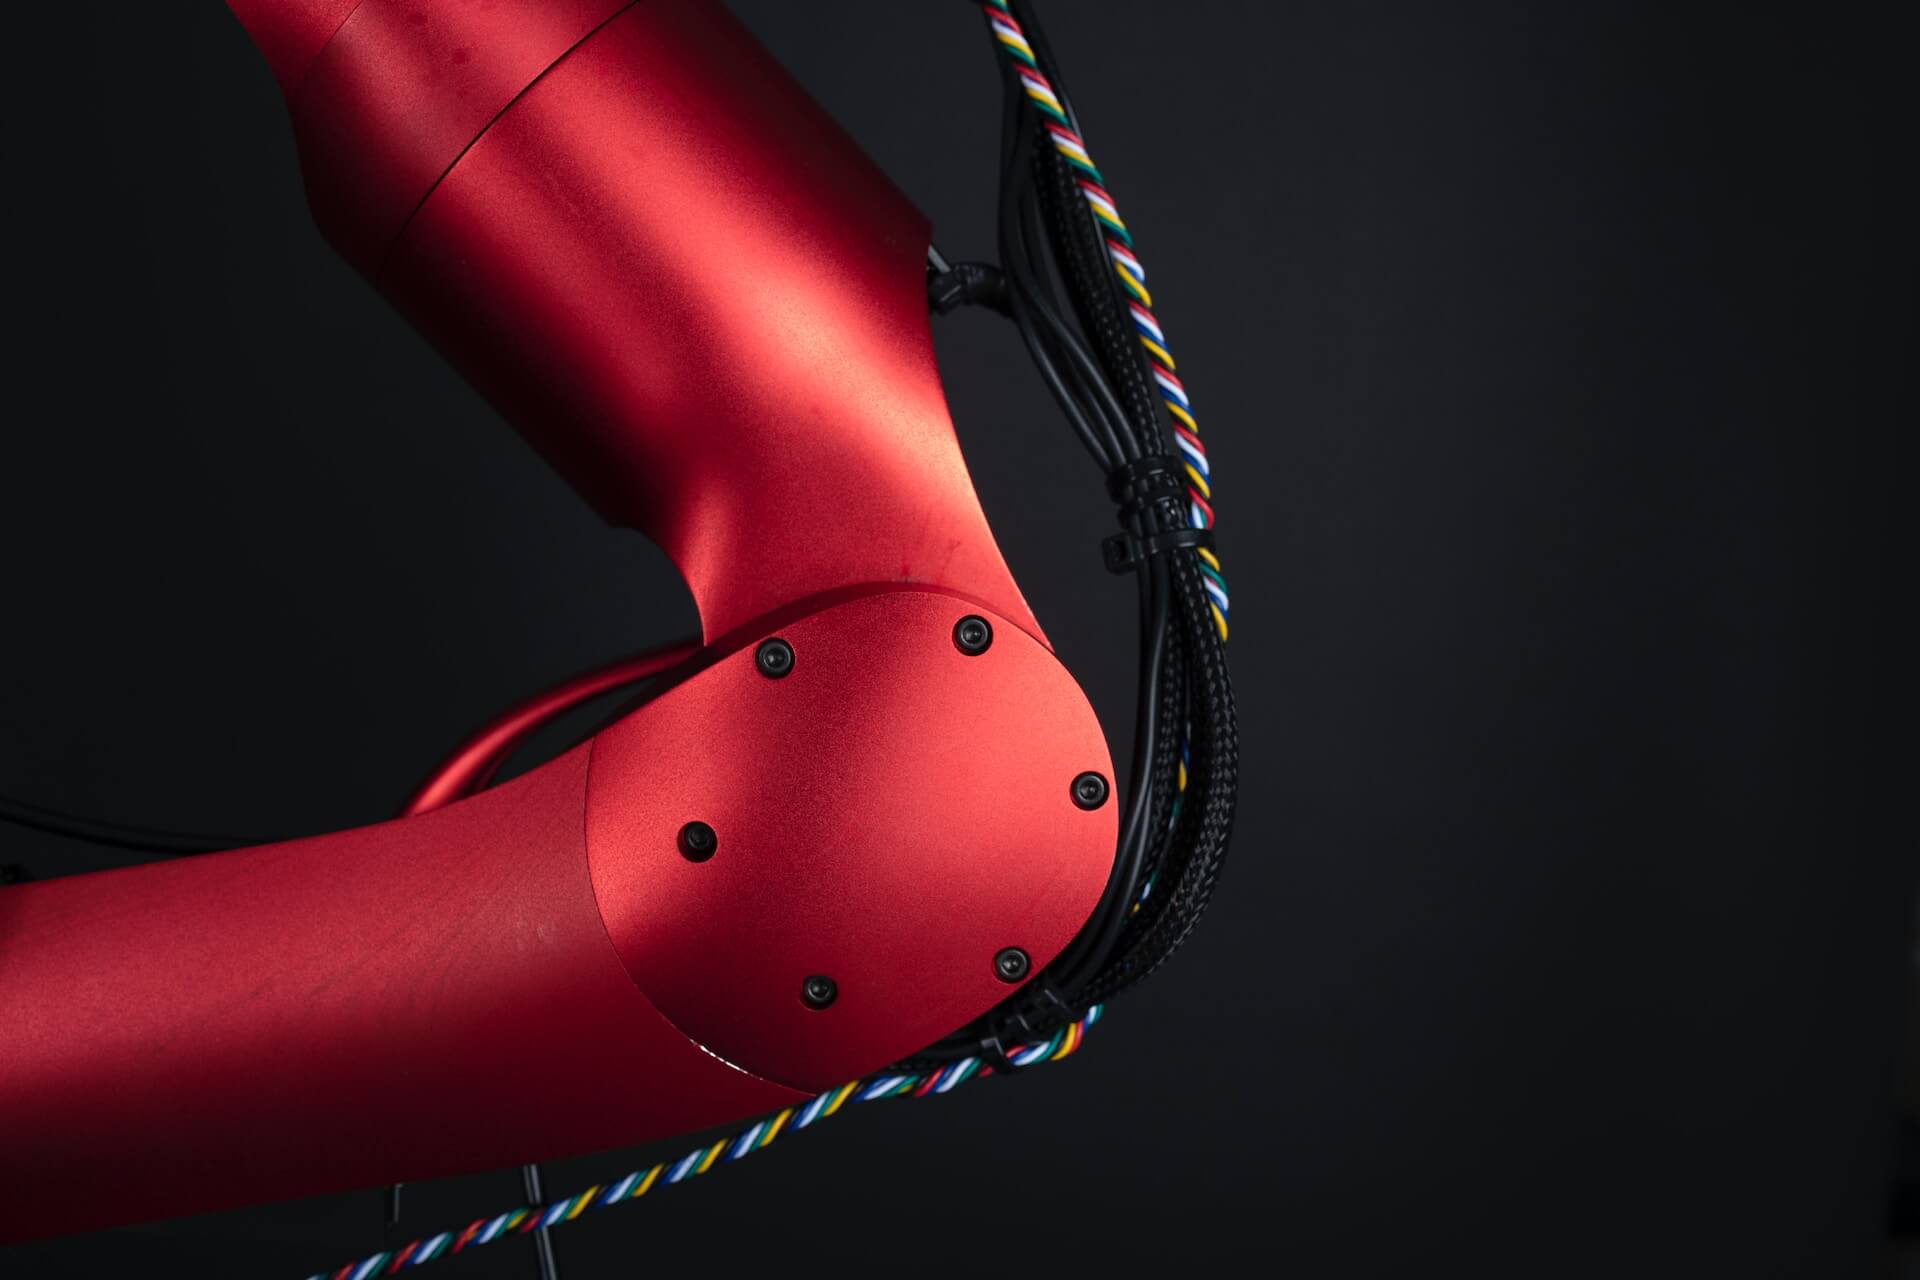 Red arm of a humanoid robot